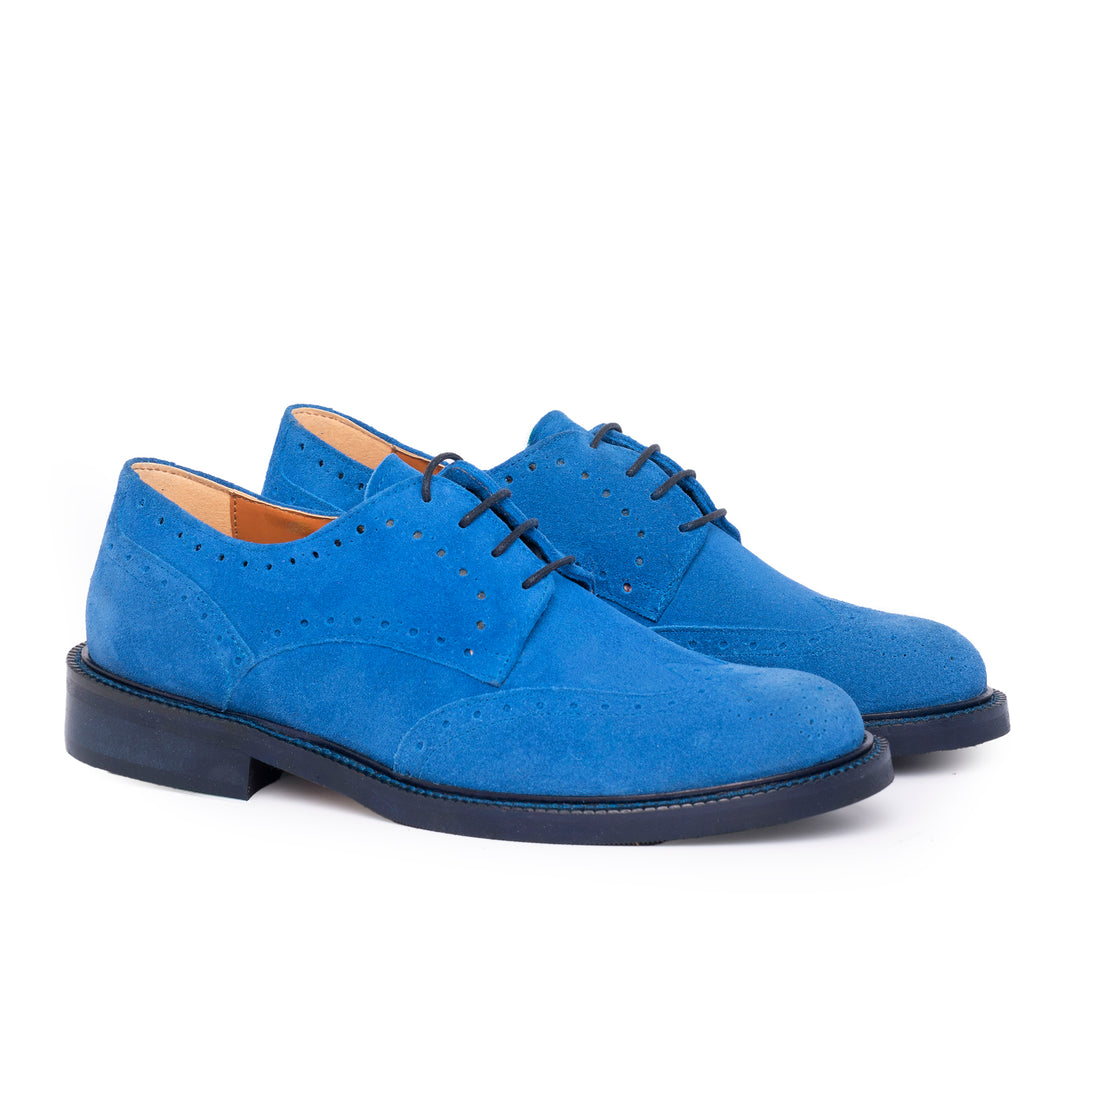 Oxford shoes in Cobalt Suede